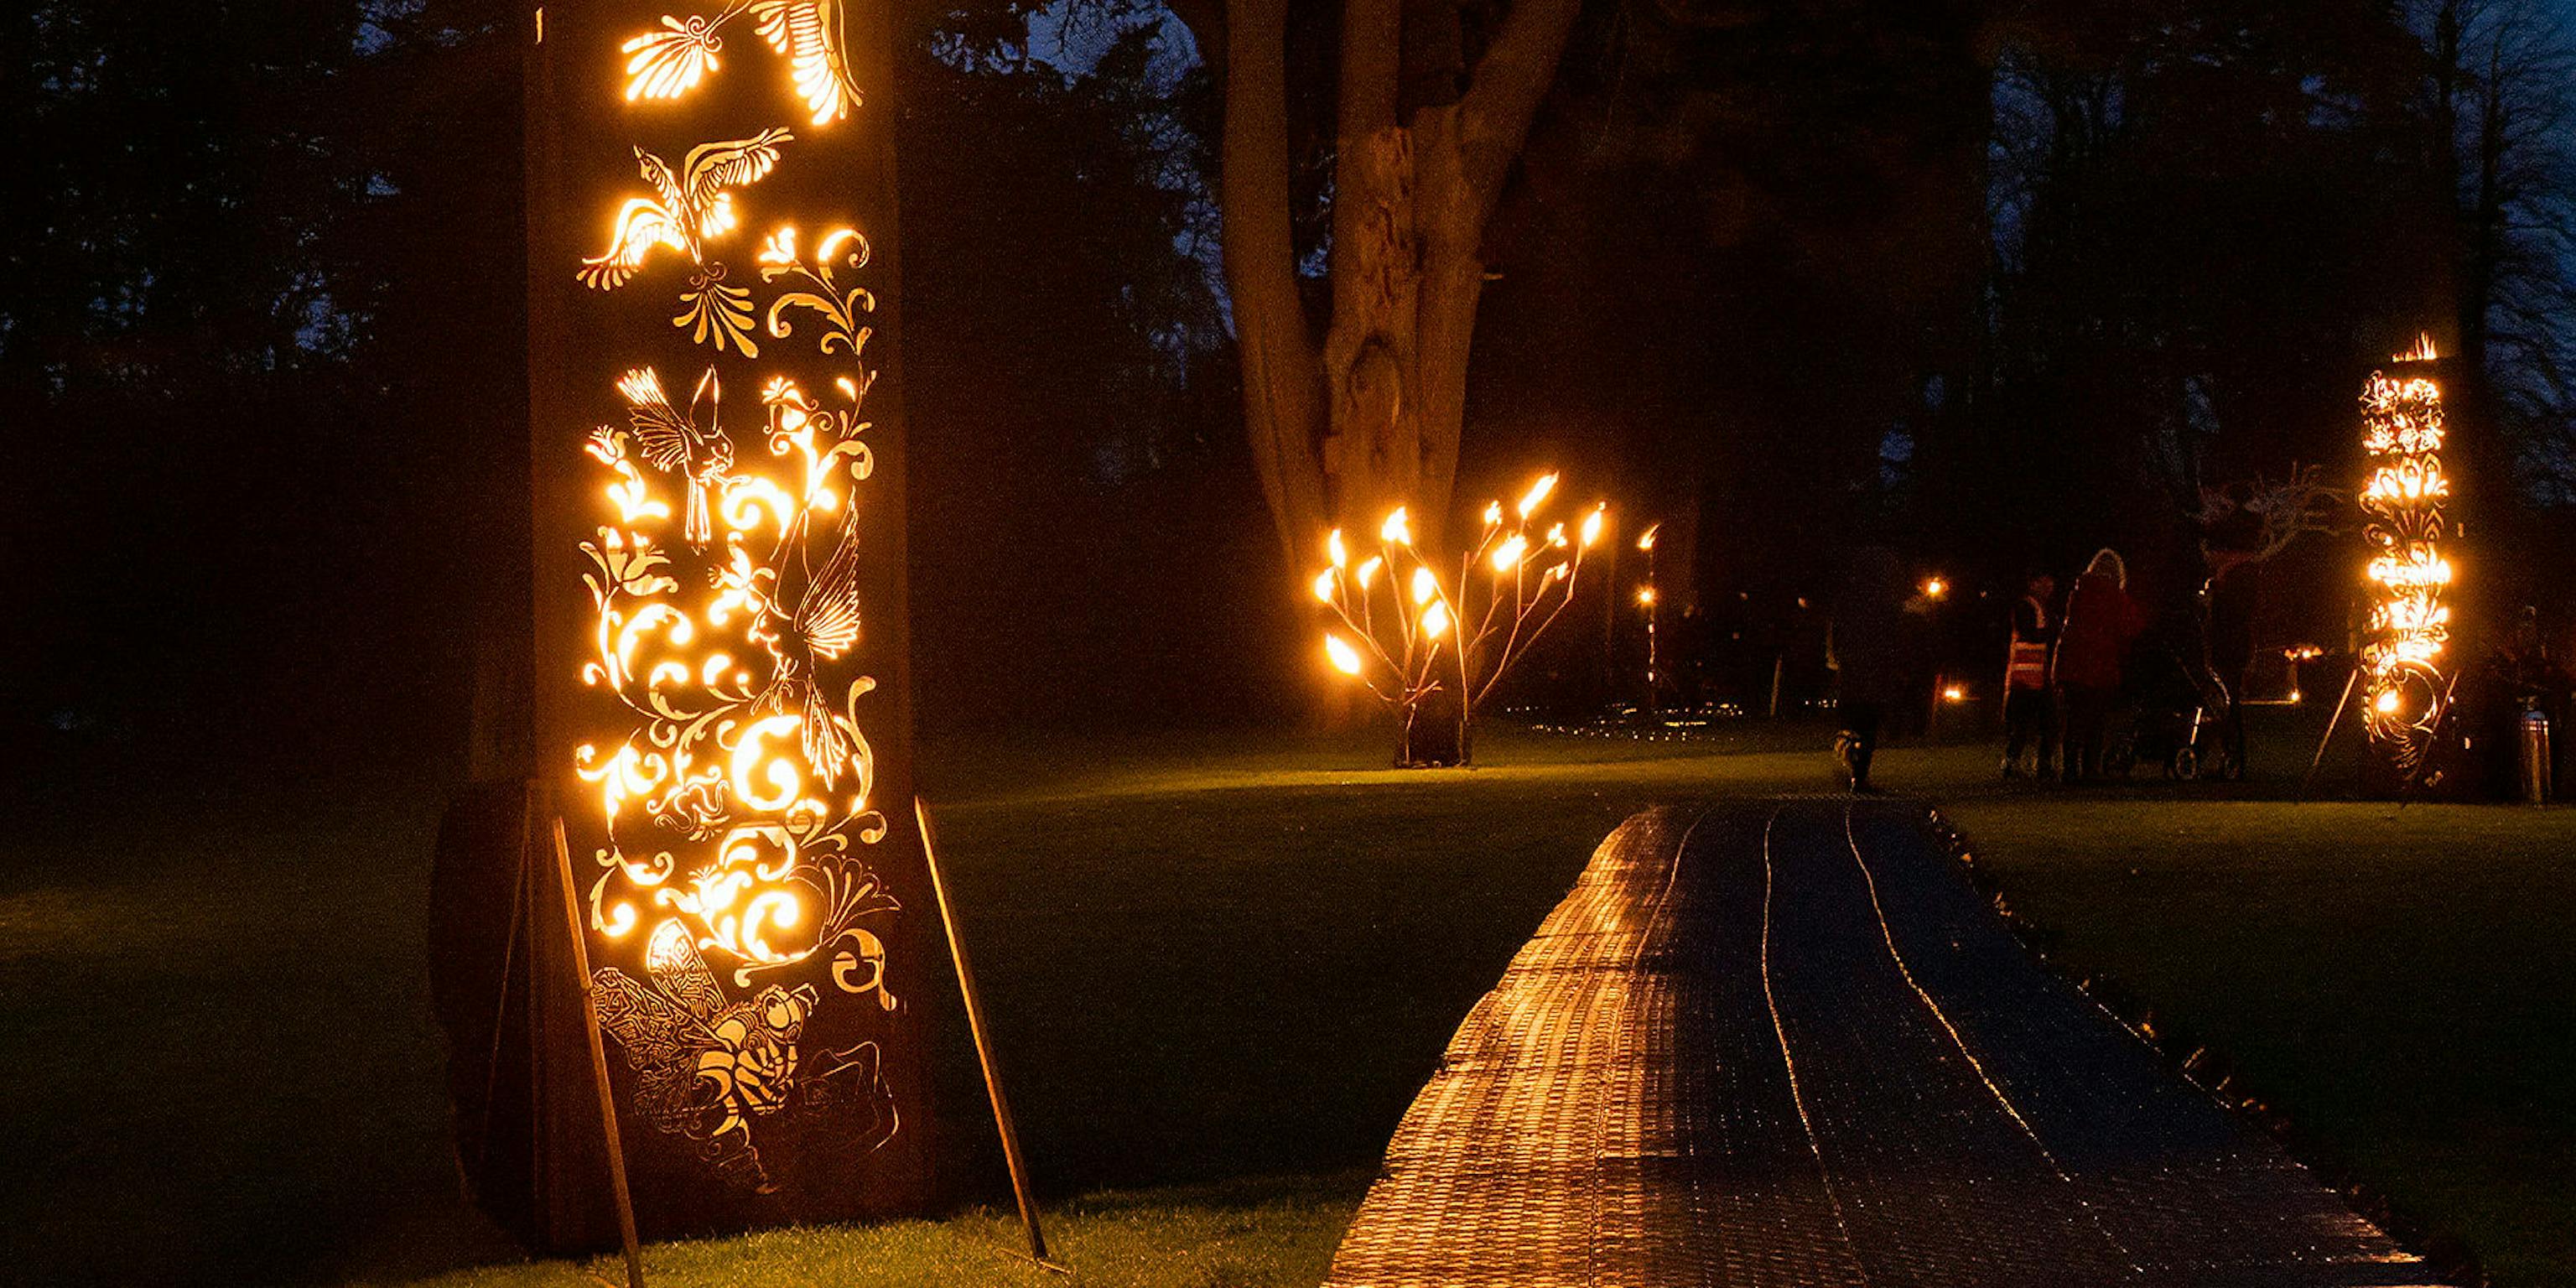 A pathway through a dark wood lit by fire sculptures along the side